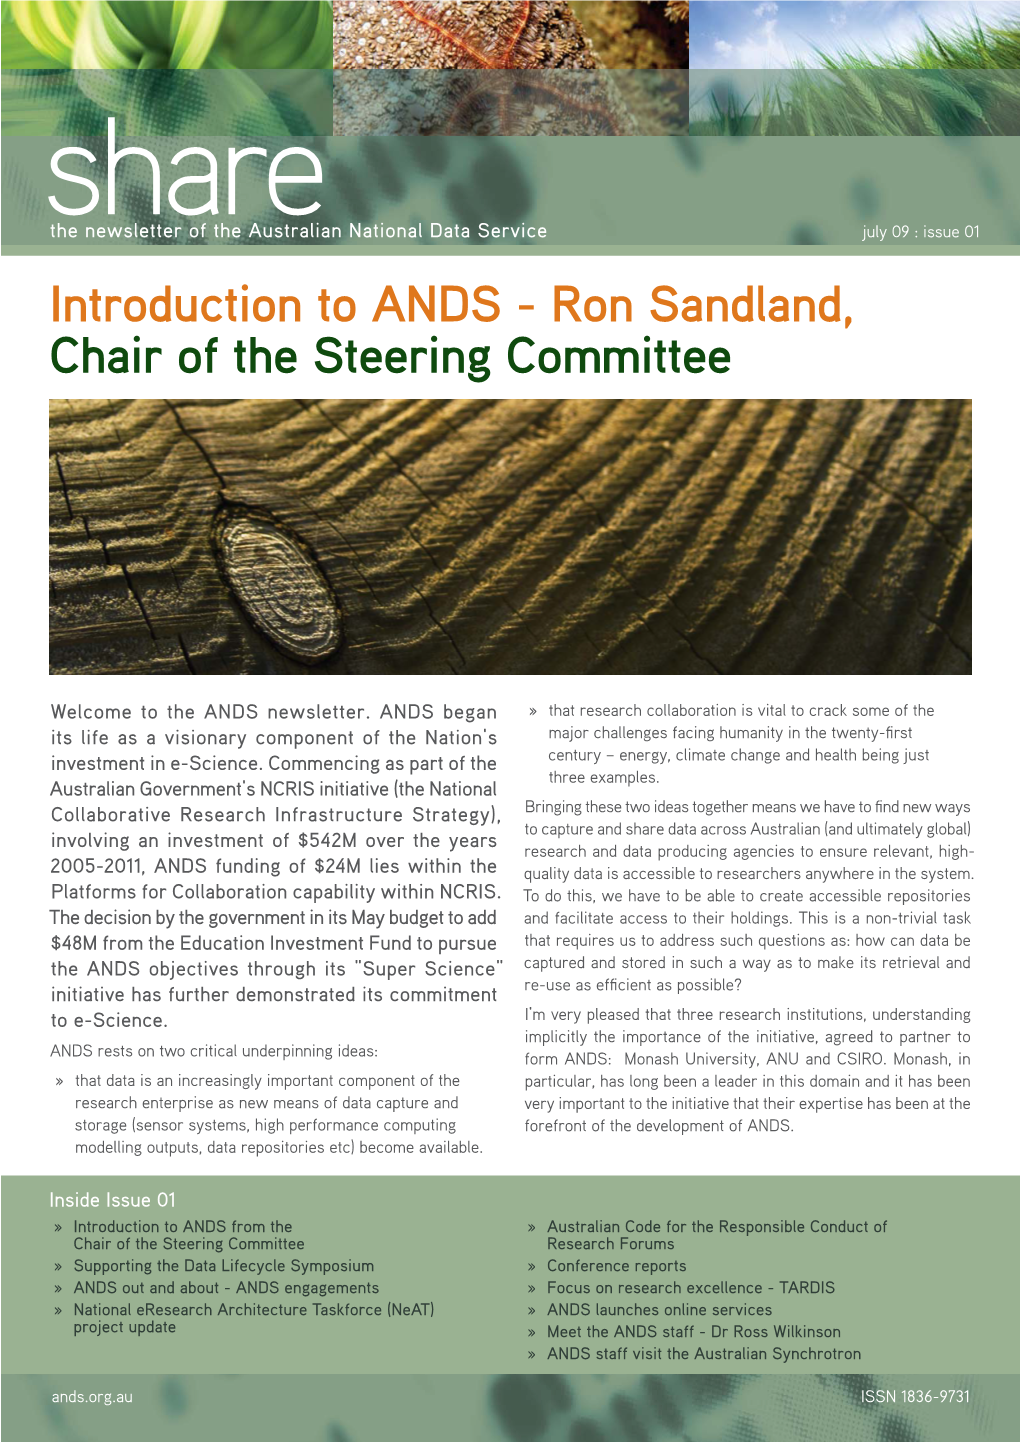 Ron Sandland, Chair of the Steering Committee